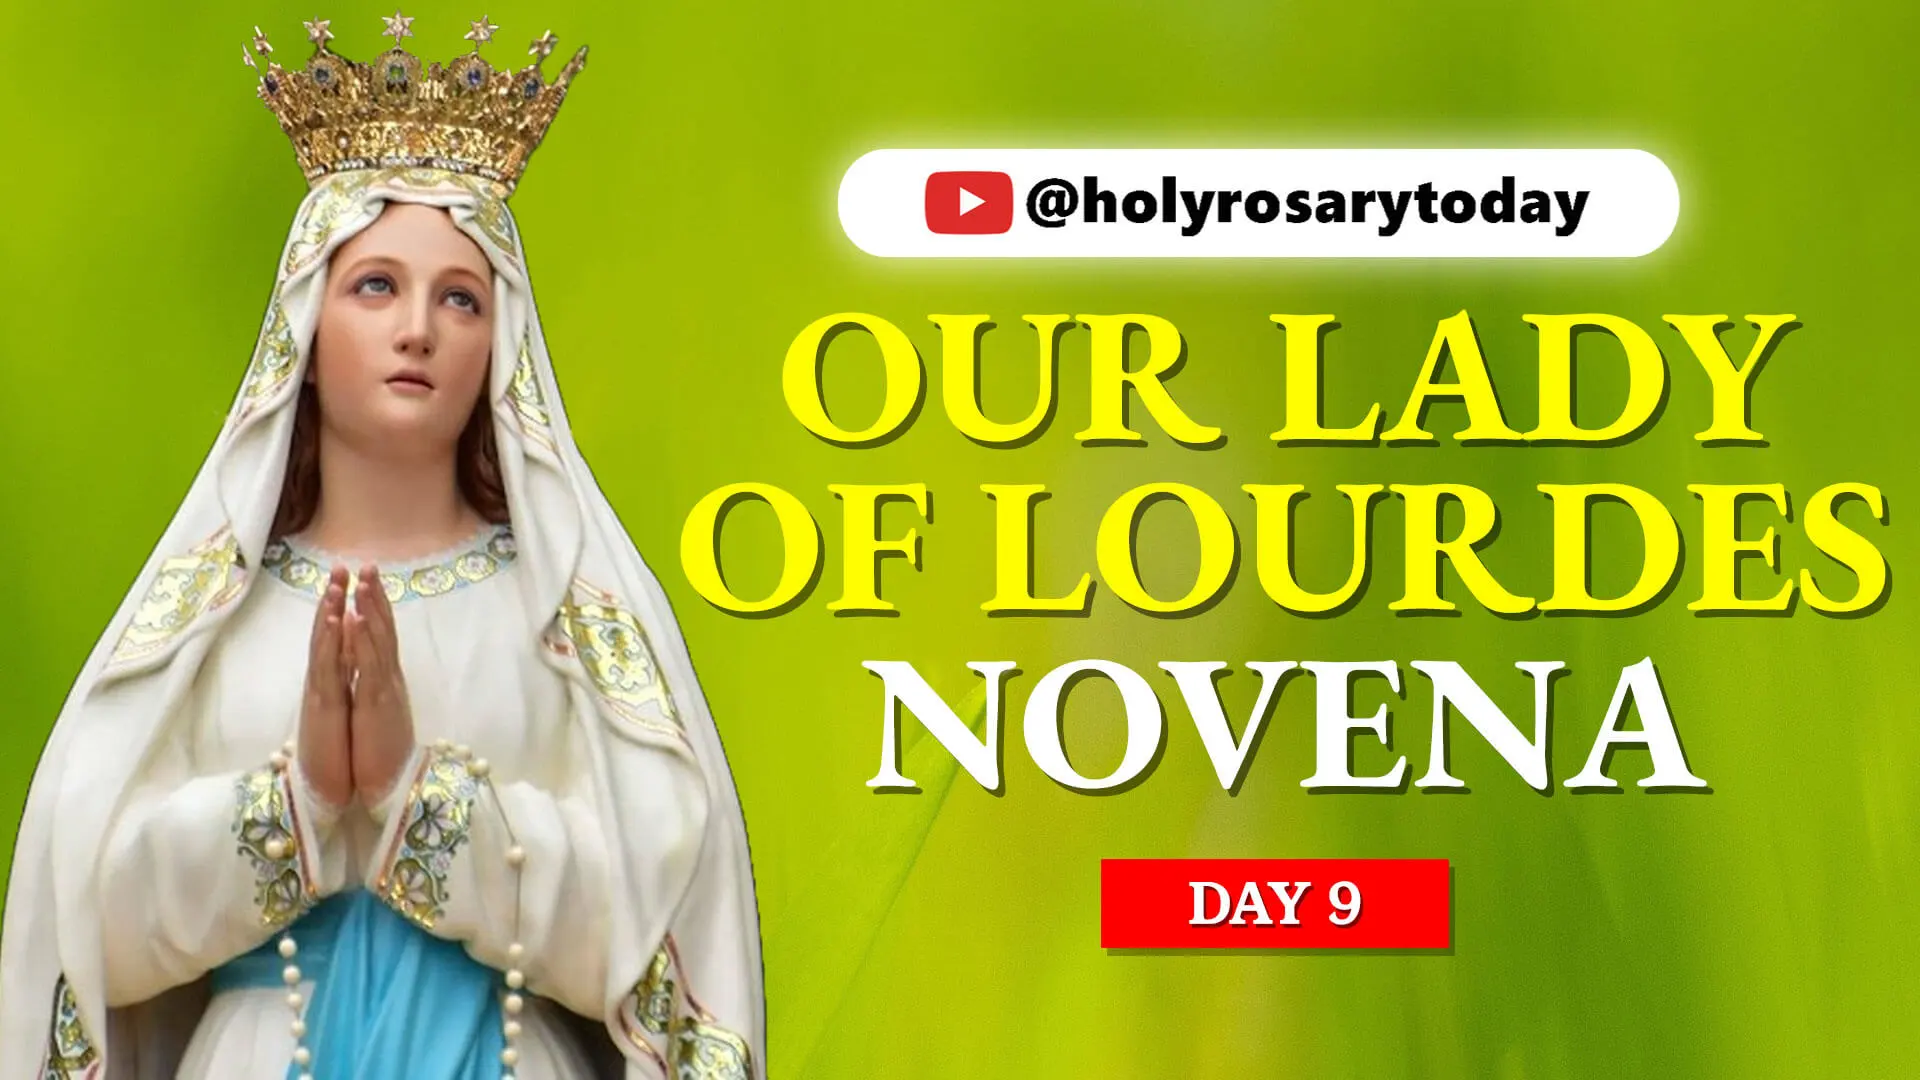 Our Lady of Lourdes Novena Day 9